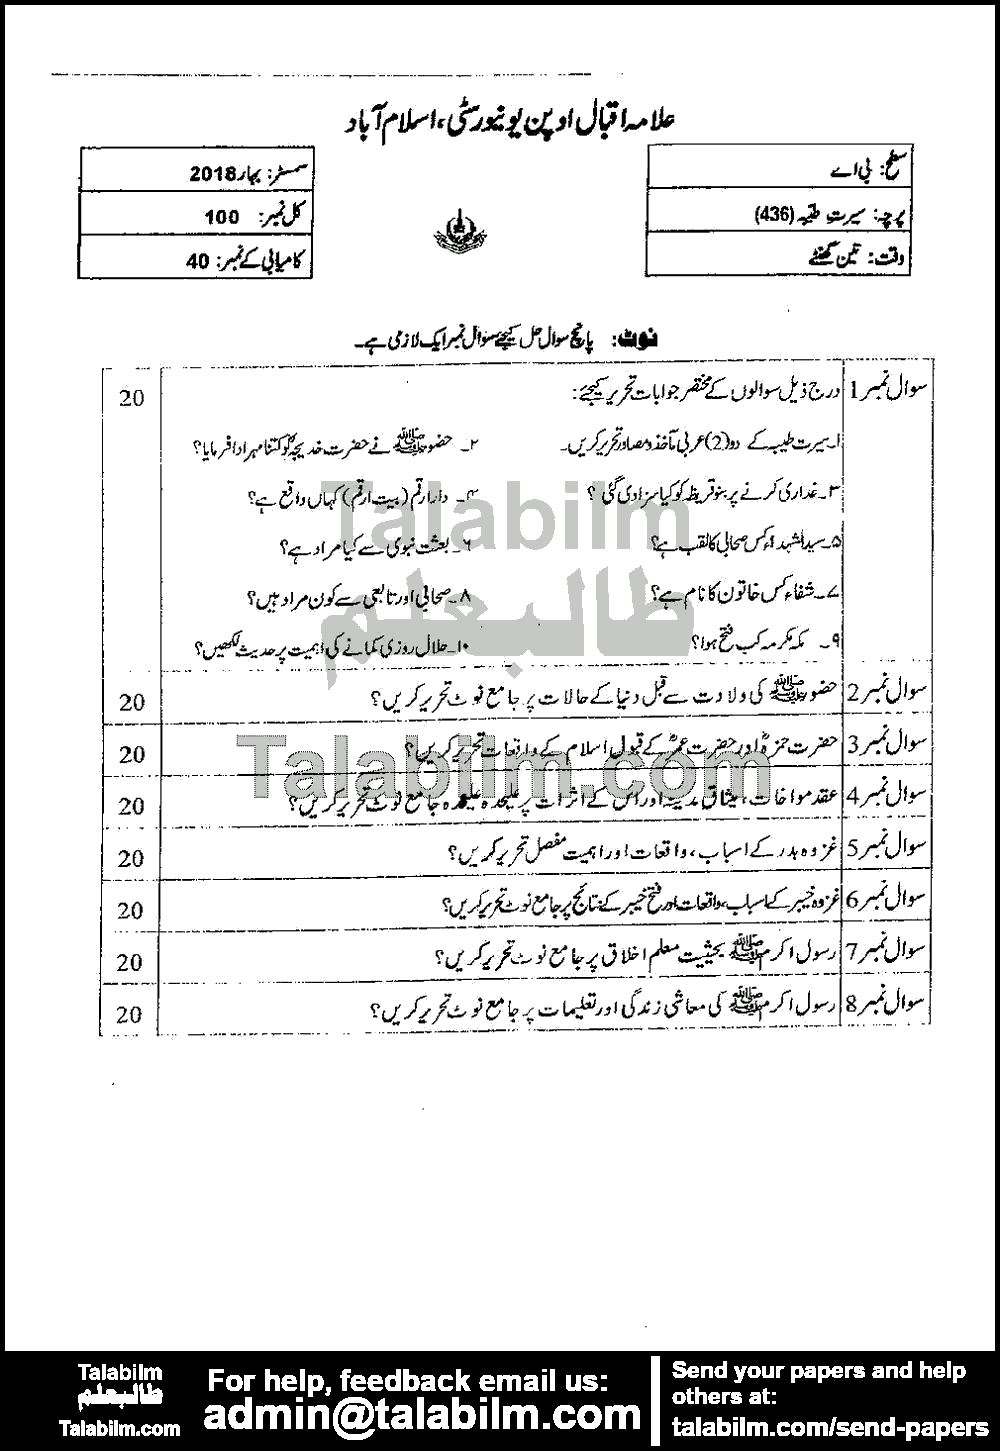 Seerat-e-Tayyaba 436 past paper for Spring 2018